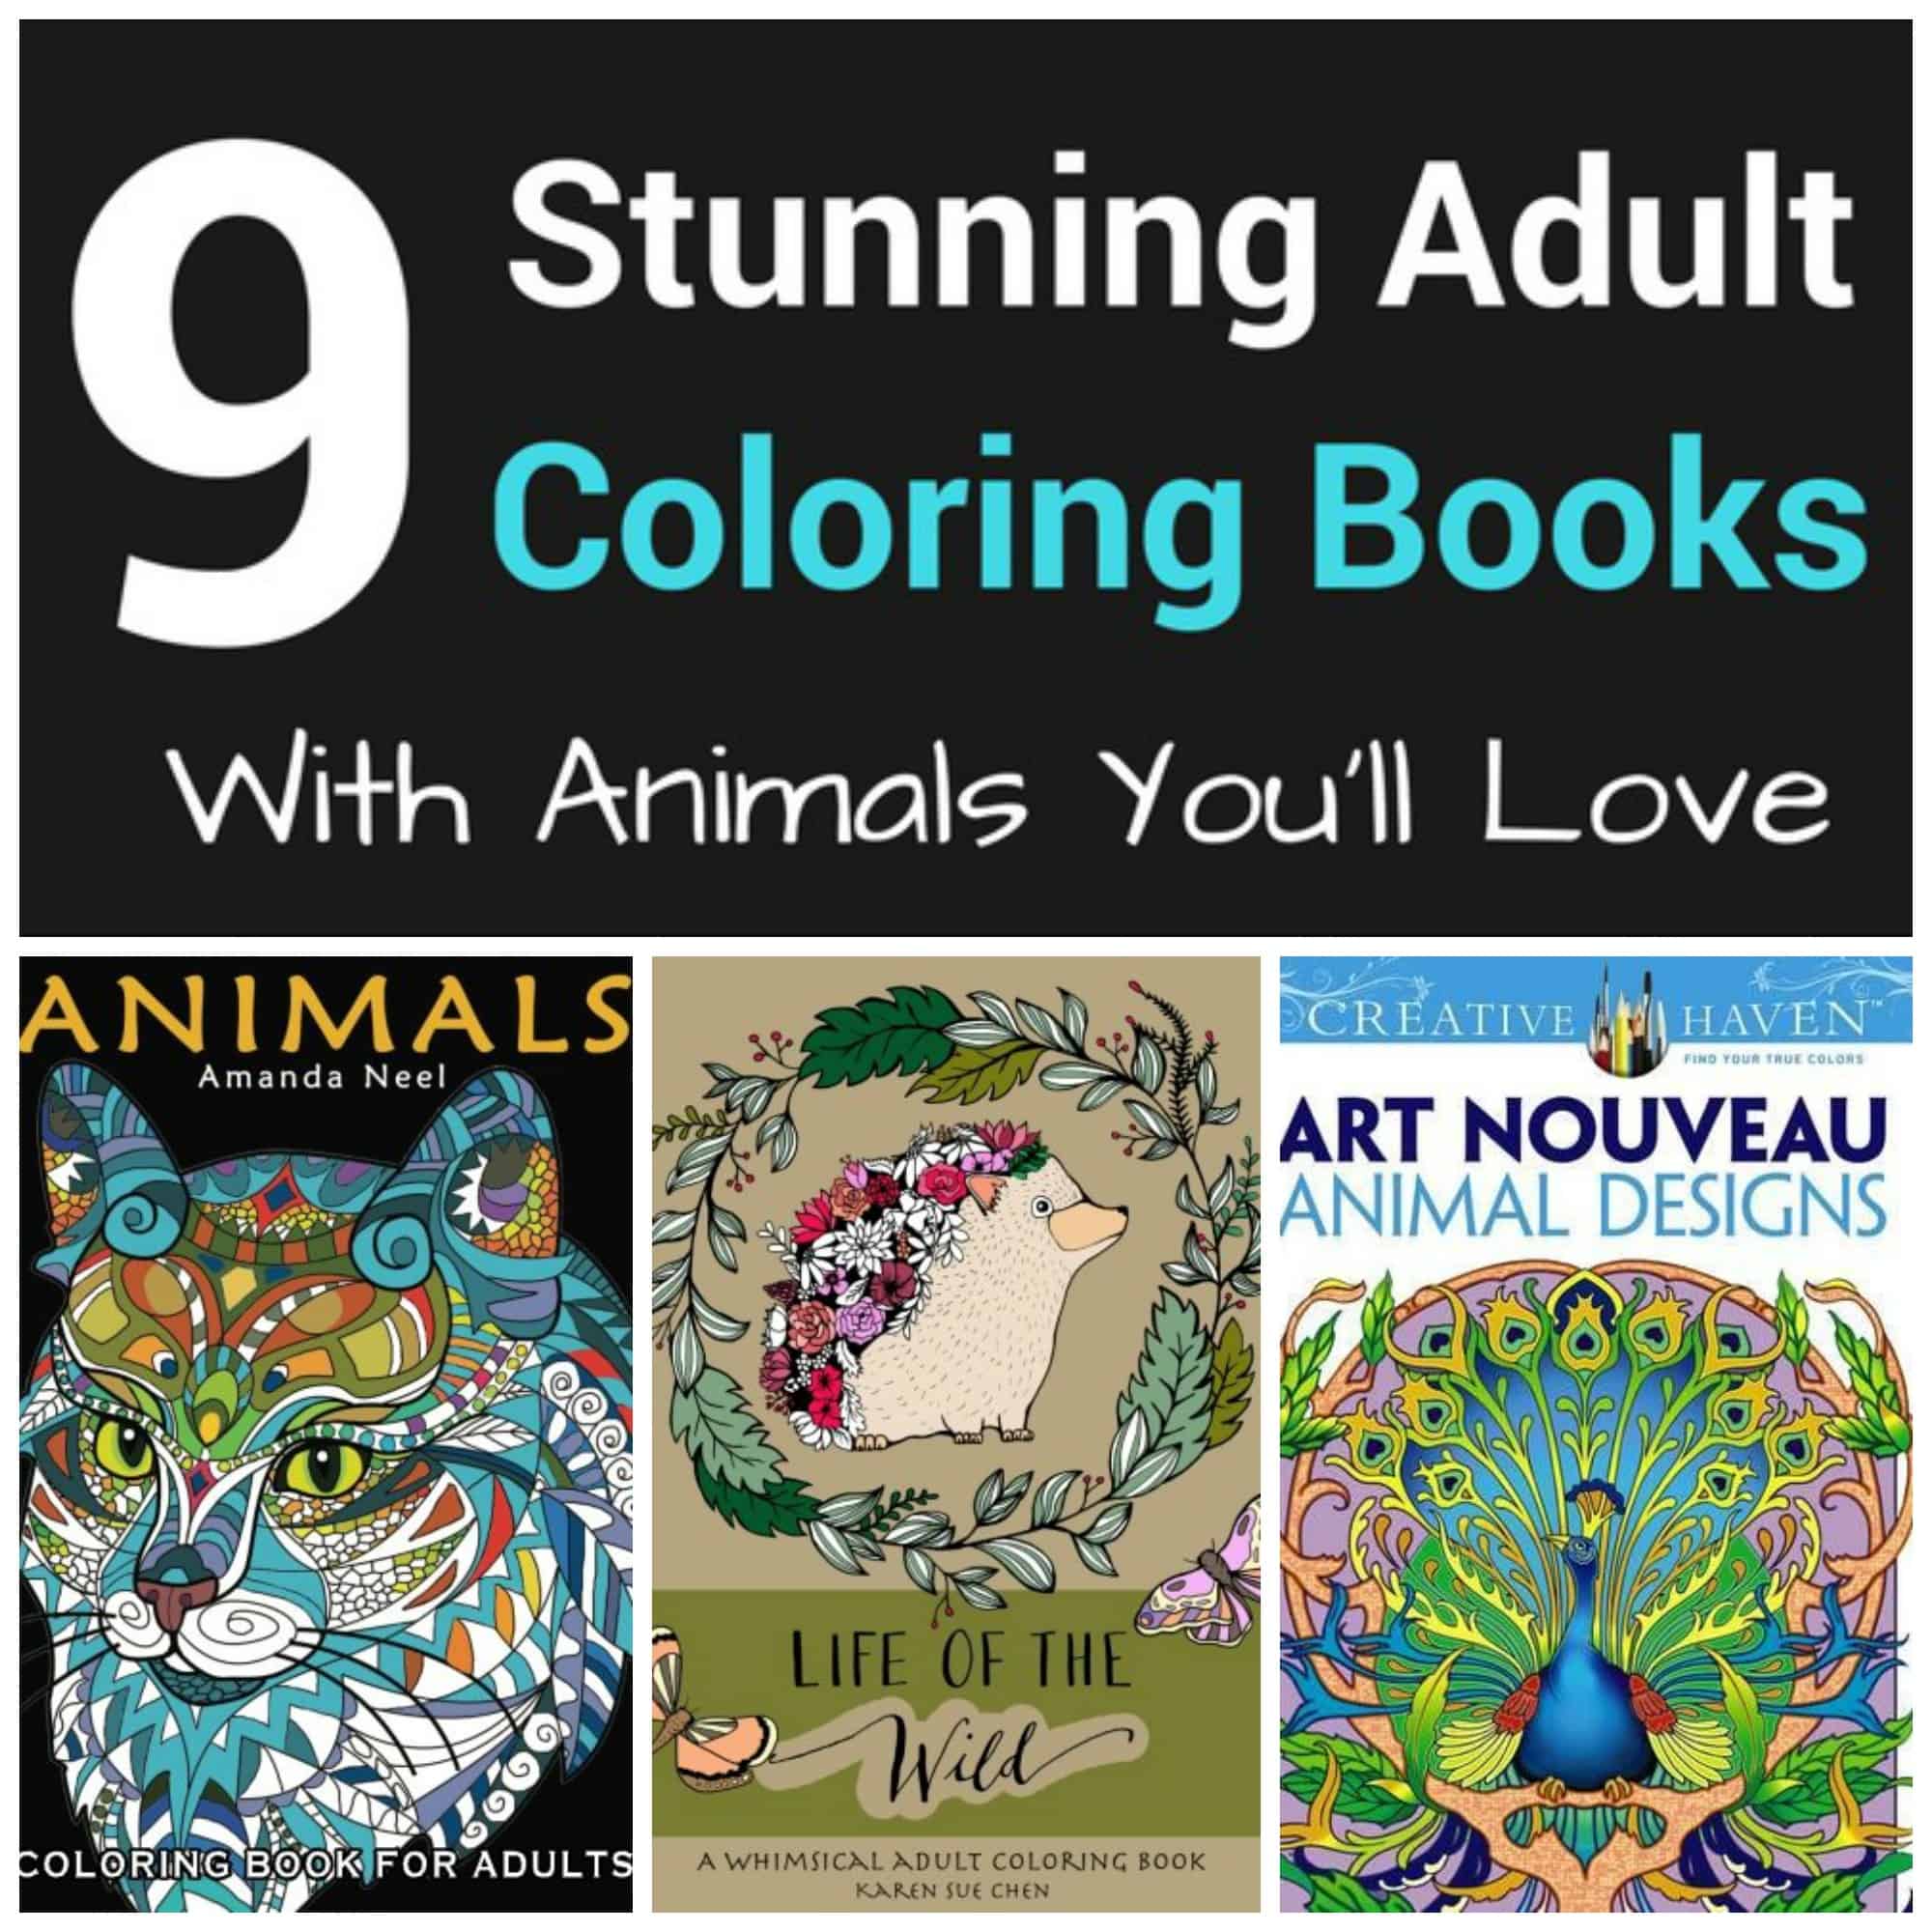 Download 9 Stunning Adult Coloring Books With Animals You Ll Love Pretty Opinionated